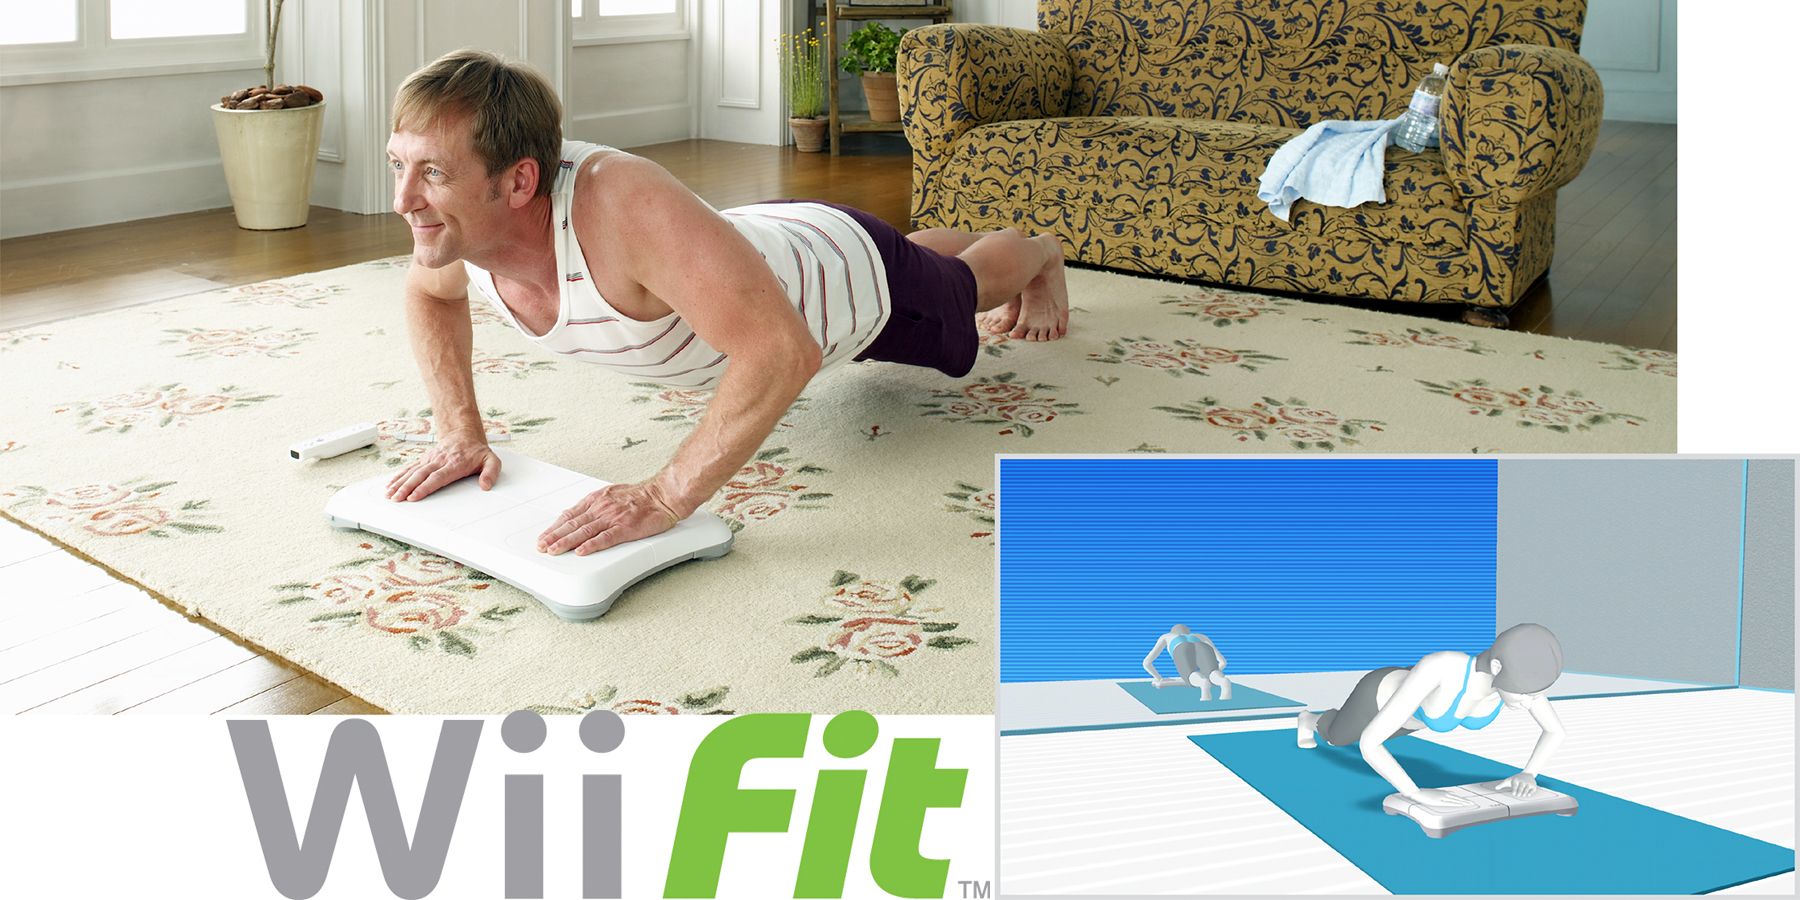 Viral Song Describes Wii Fit's Negative Impact on Self Esteem